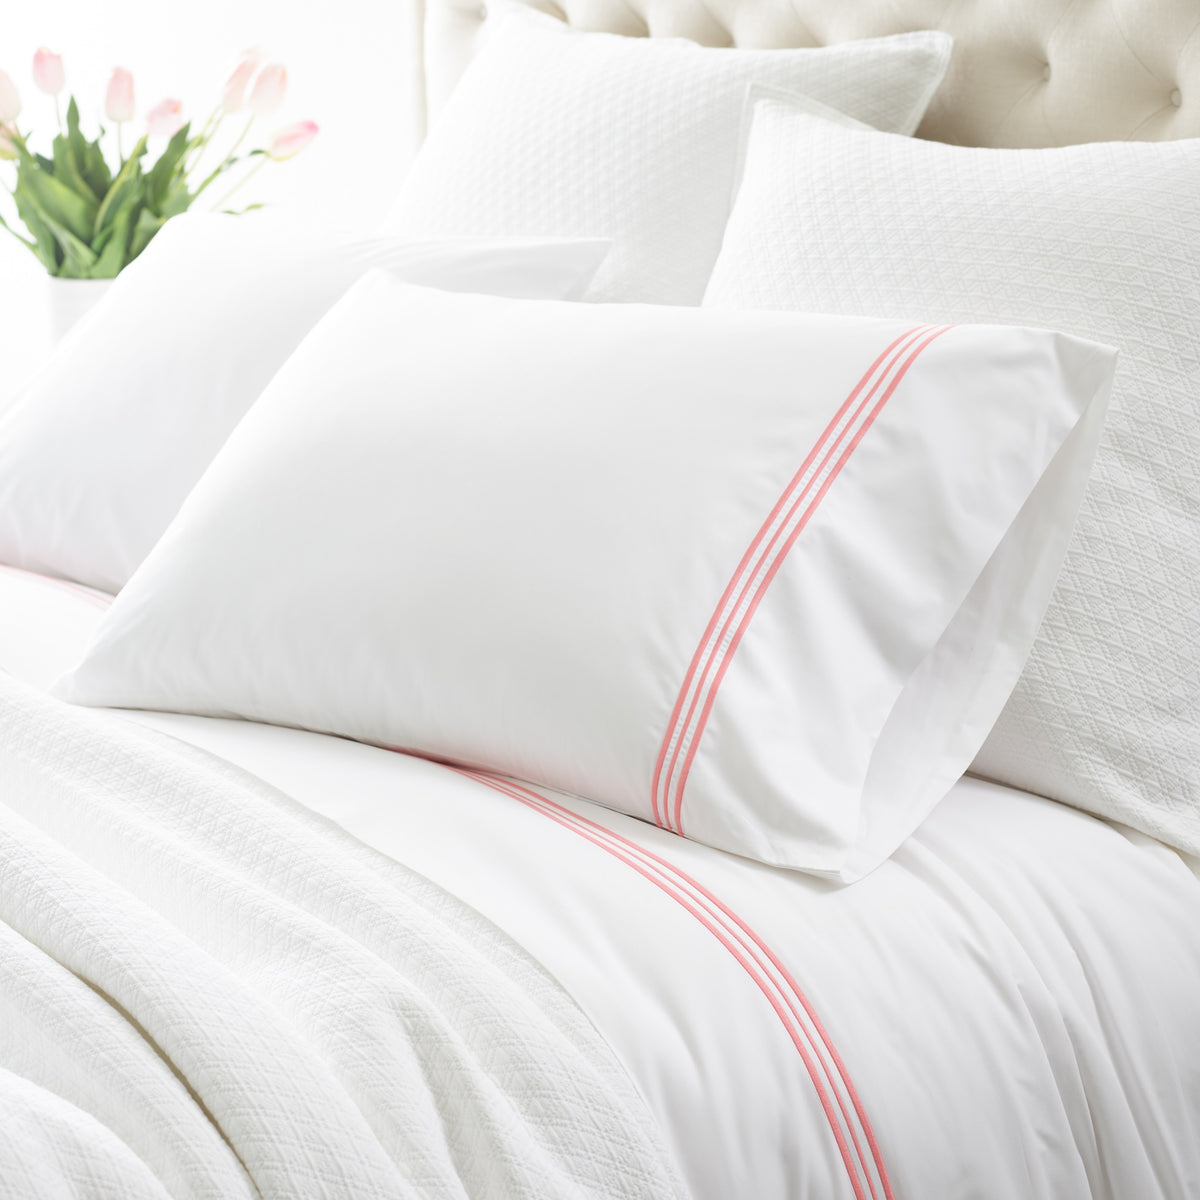 Pillowcase of Pine Cone Hill Trio in Bed in Color Coral